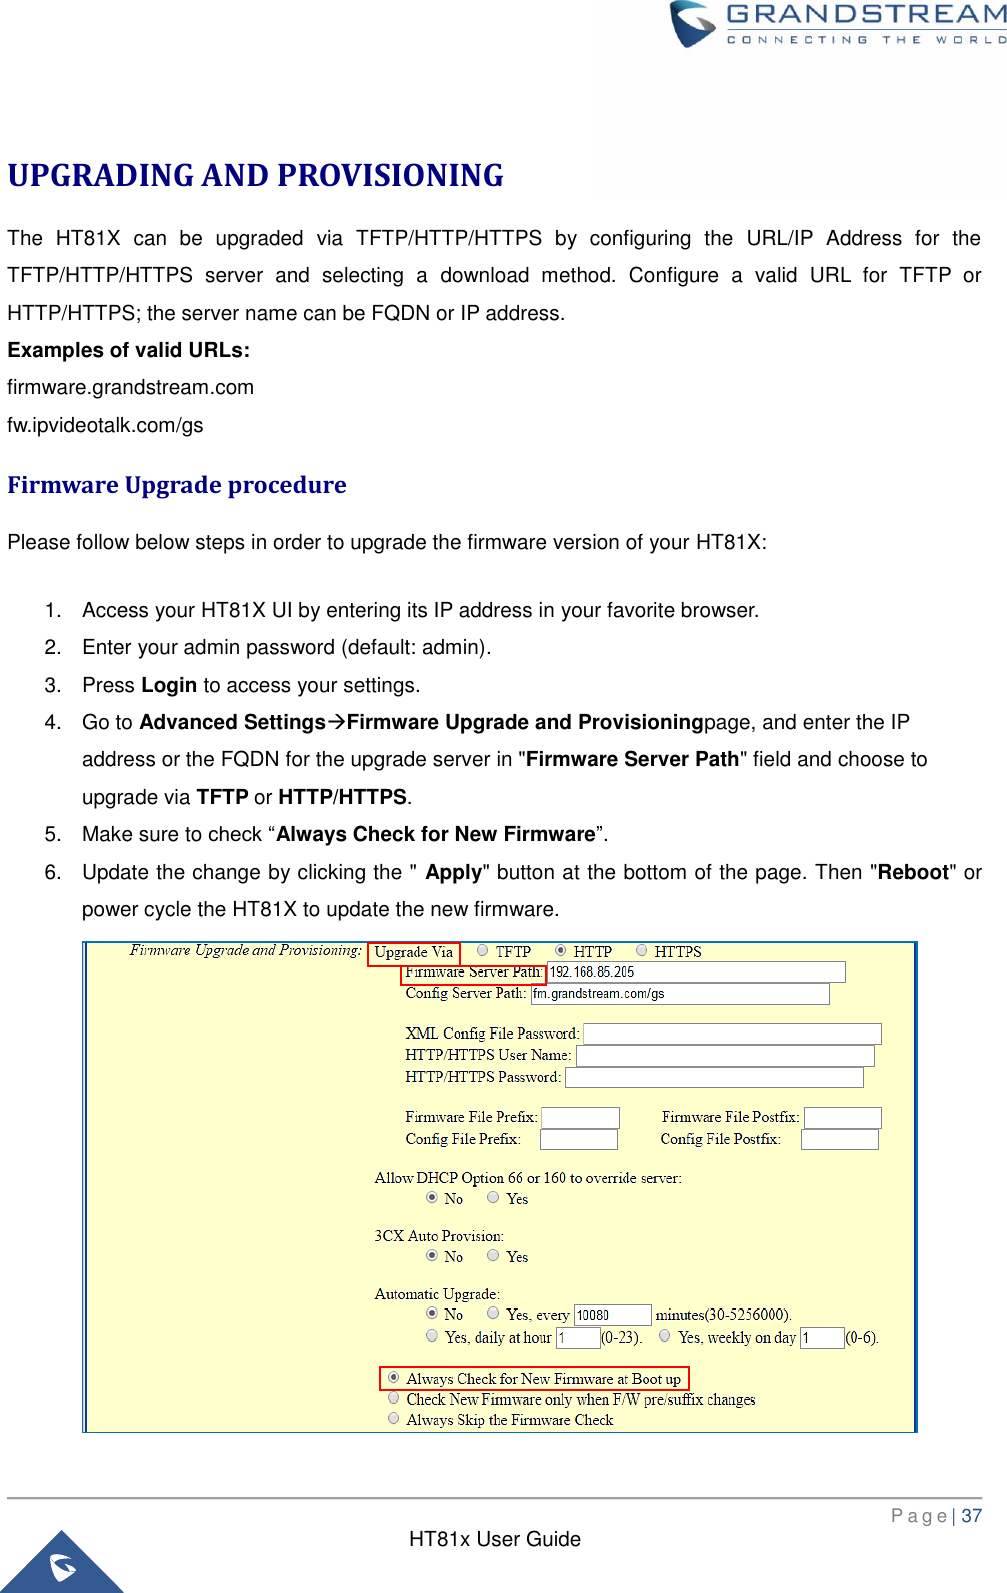       P a g e | 37      HT81x User Guide   UPGRADING AND PROVISIONING The  HT81X  can  be  upgraded  via  TFTP/HTTP/HTTPS  by  configuring  the  URL/IP  Address  for  the TFTP/HTTP/HTTPS  server  and  selecting  a  download  method.  Configure  a  valid  URL  for  TFTP  or HTTP/HTTPS; the server name can be FQDN or IP address. Examples of valid URLs: firmware.grandstream.com fw.ipvideotalk.com/gs Firmware Upgrade procedure Please follow below steps in order to upgrade the firmware version of your HT81X:  1.  Access your HT81X UI by entering its IP address in your favorite browser. 2.  Enter your admin password (default: admin). 3.  Press Login to access your settings. 4. Go to Advanced SettingsFirmware Upgrade and Provisioningpage, and enter the IP address or the FQDN for the upgrade server in &quot;Firmware Server Path&quot; field and choose to upgrade via TFTP or HTTP/HTTPS. 5.  Make sure to check “Always Check for New Firmware”. 6.  Update the change by clicking the &quot; Apply&quot; button at the bottom of the page. Then &quot;Reboot&quot; or power cycle the HT81X to update the new firmware.  